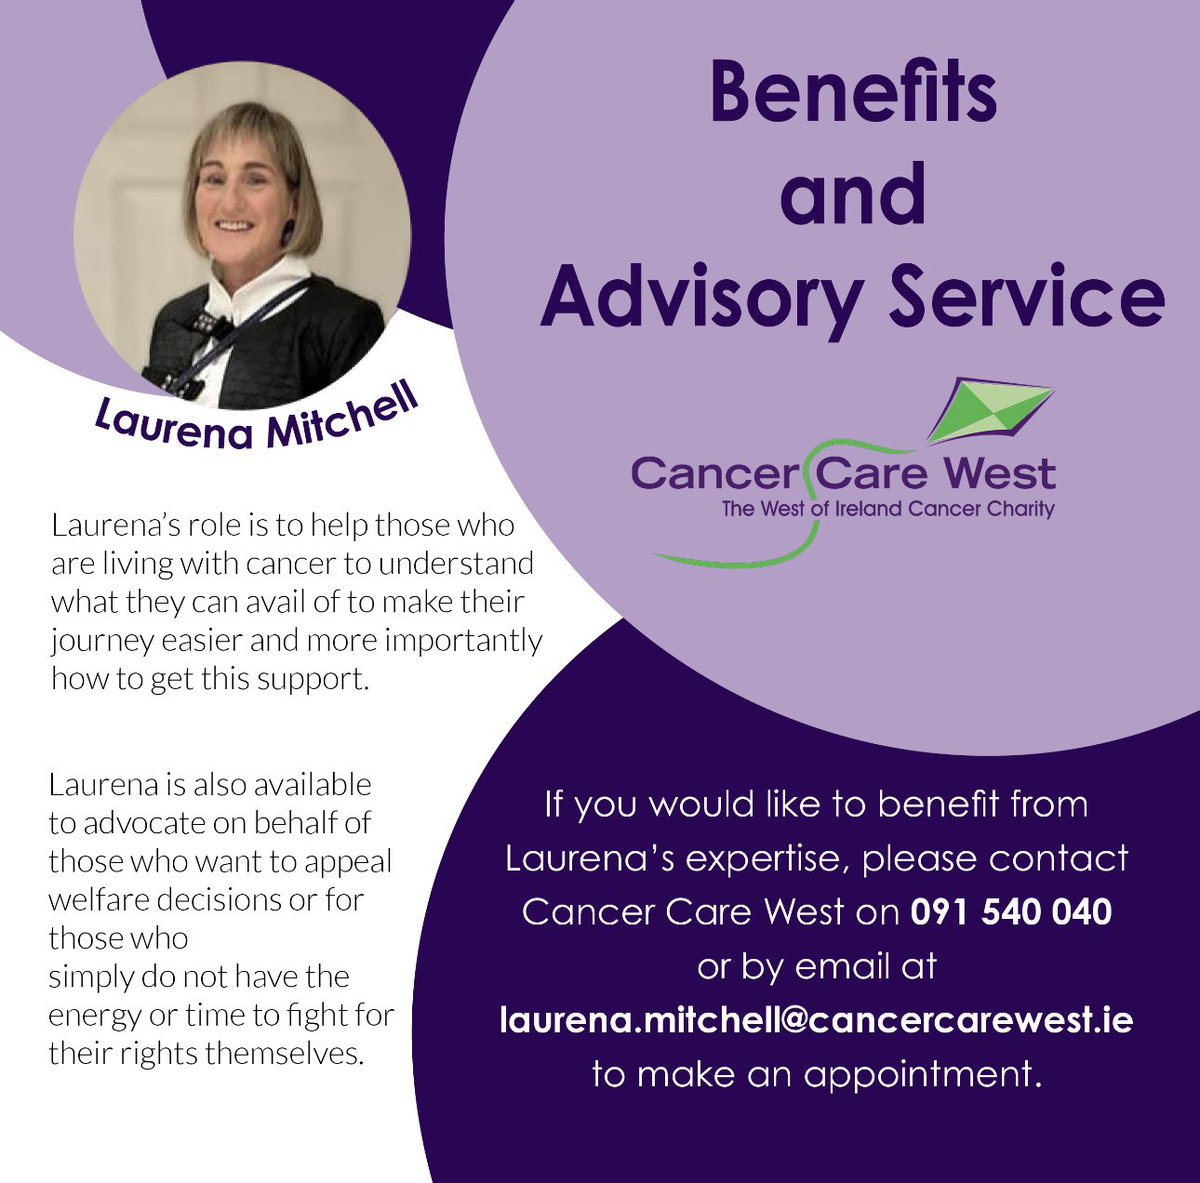 To avail of our free Benefits and Advisory Service please get in touch with Laurena.